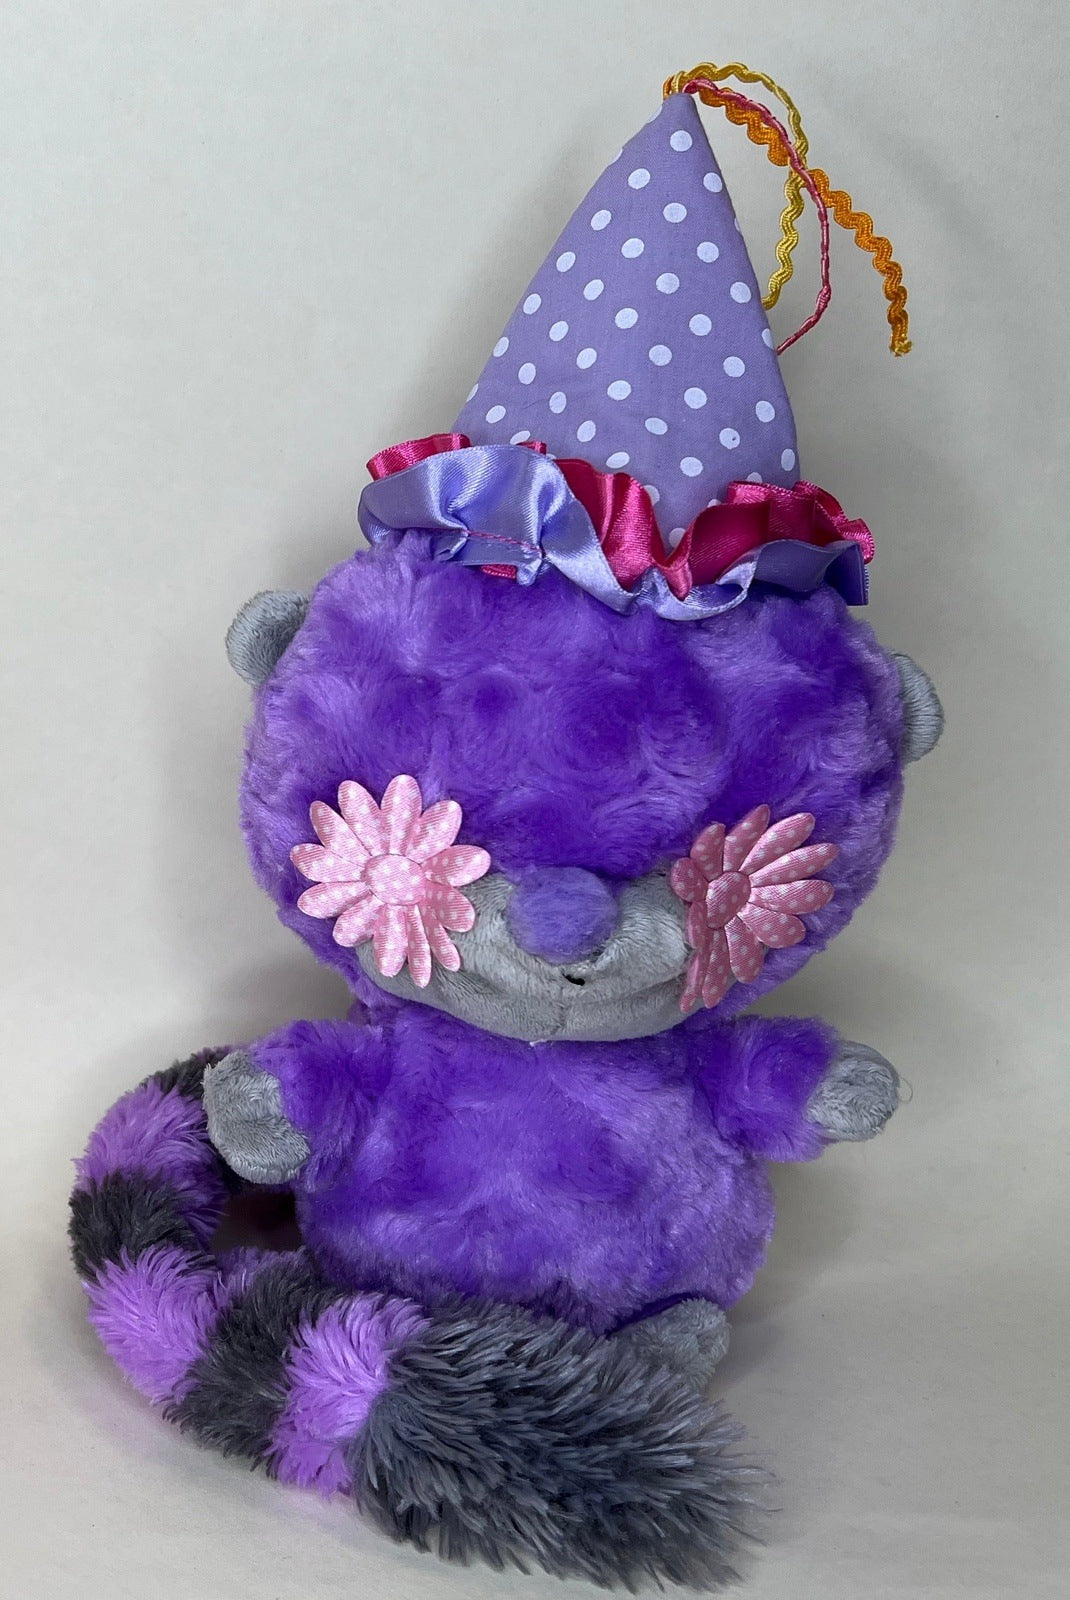 Stuffed & Squeaky Birthday Toys for Dogs & Puppies